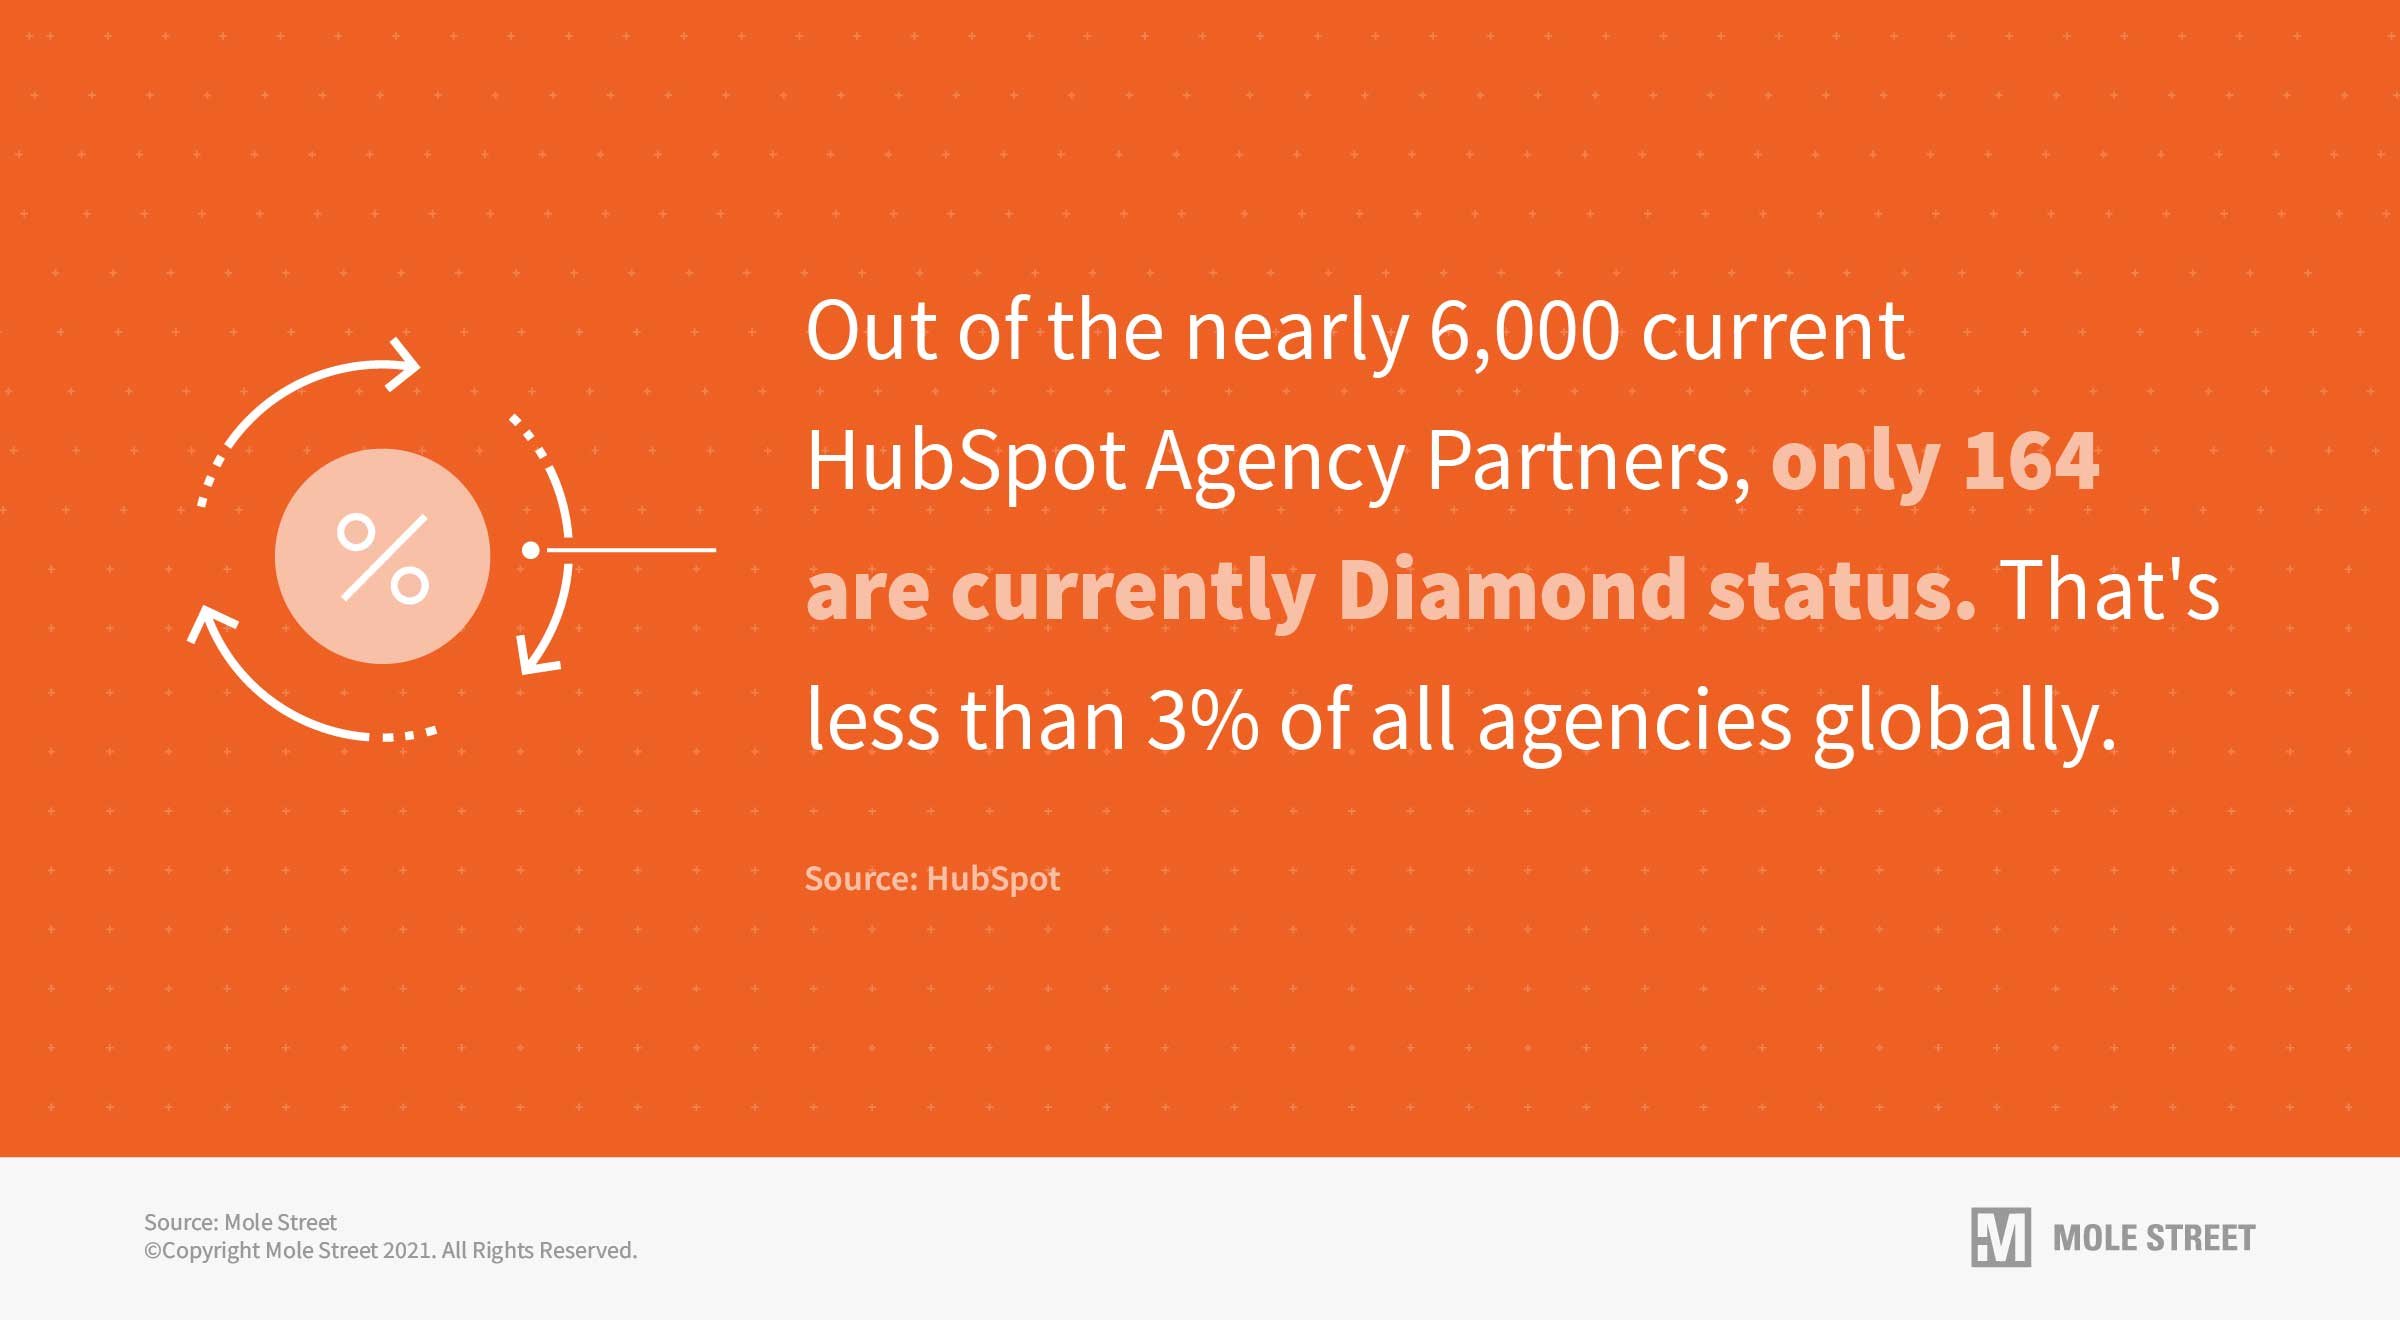 Only 164 HubSpot agency partners have reached Diamond status to date.